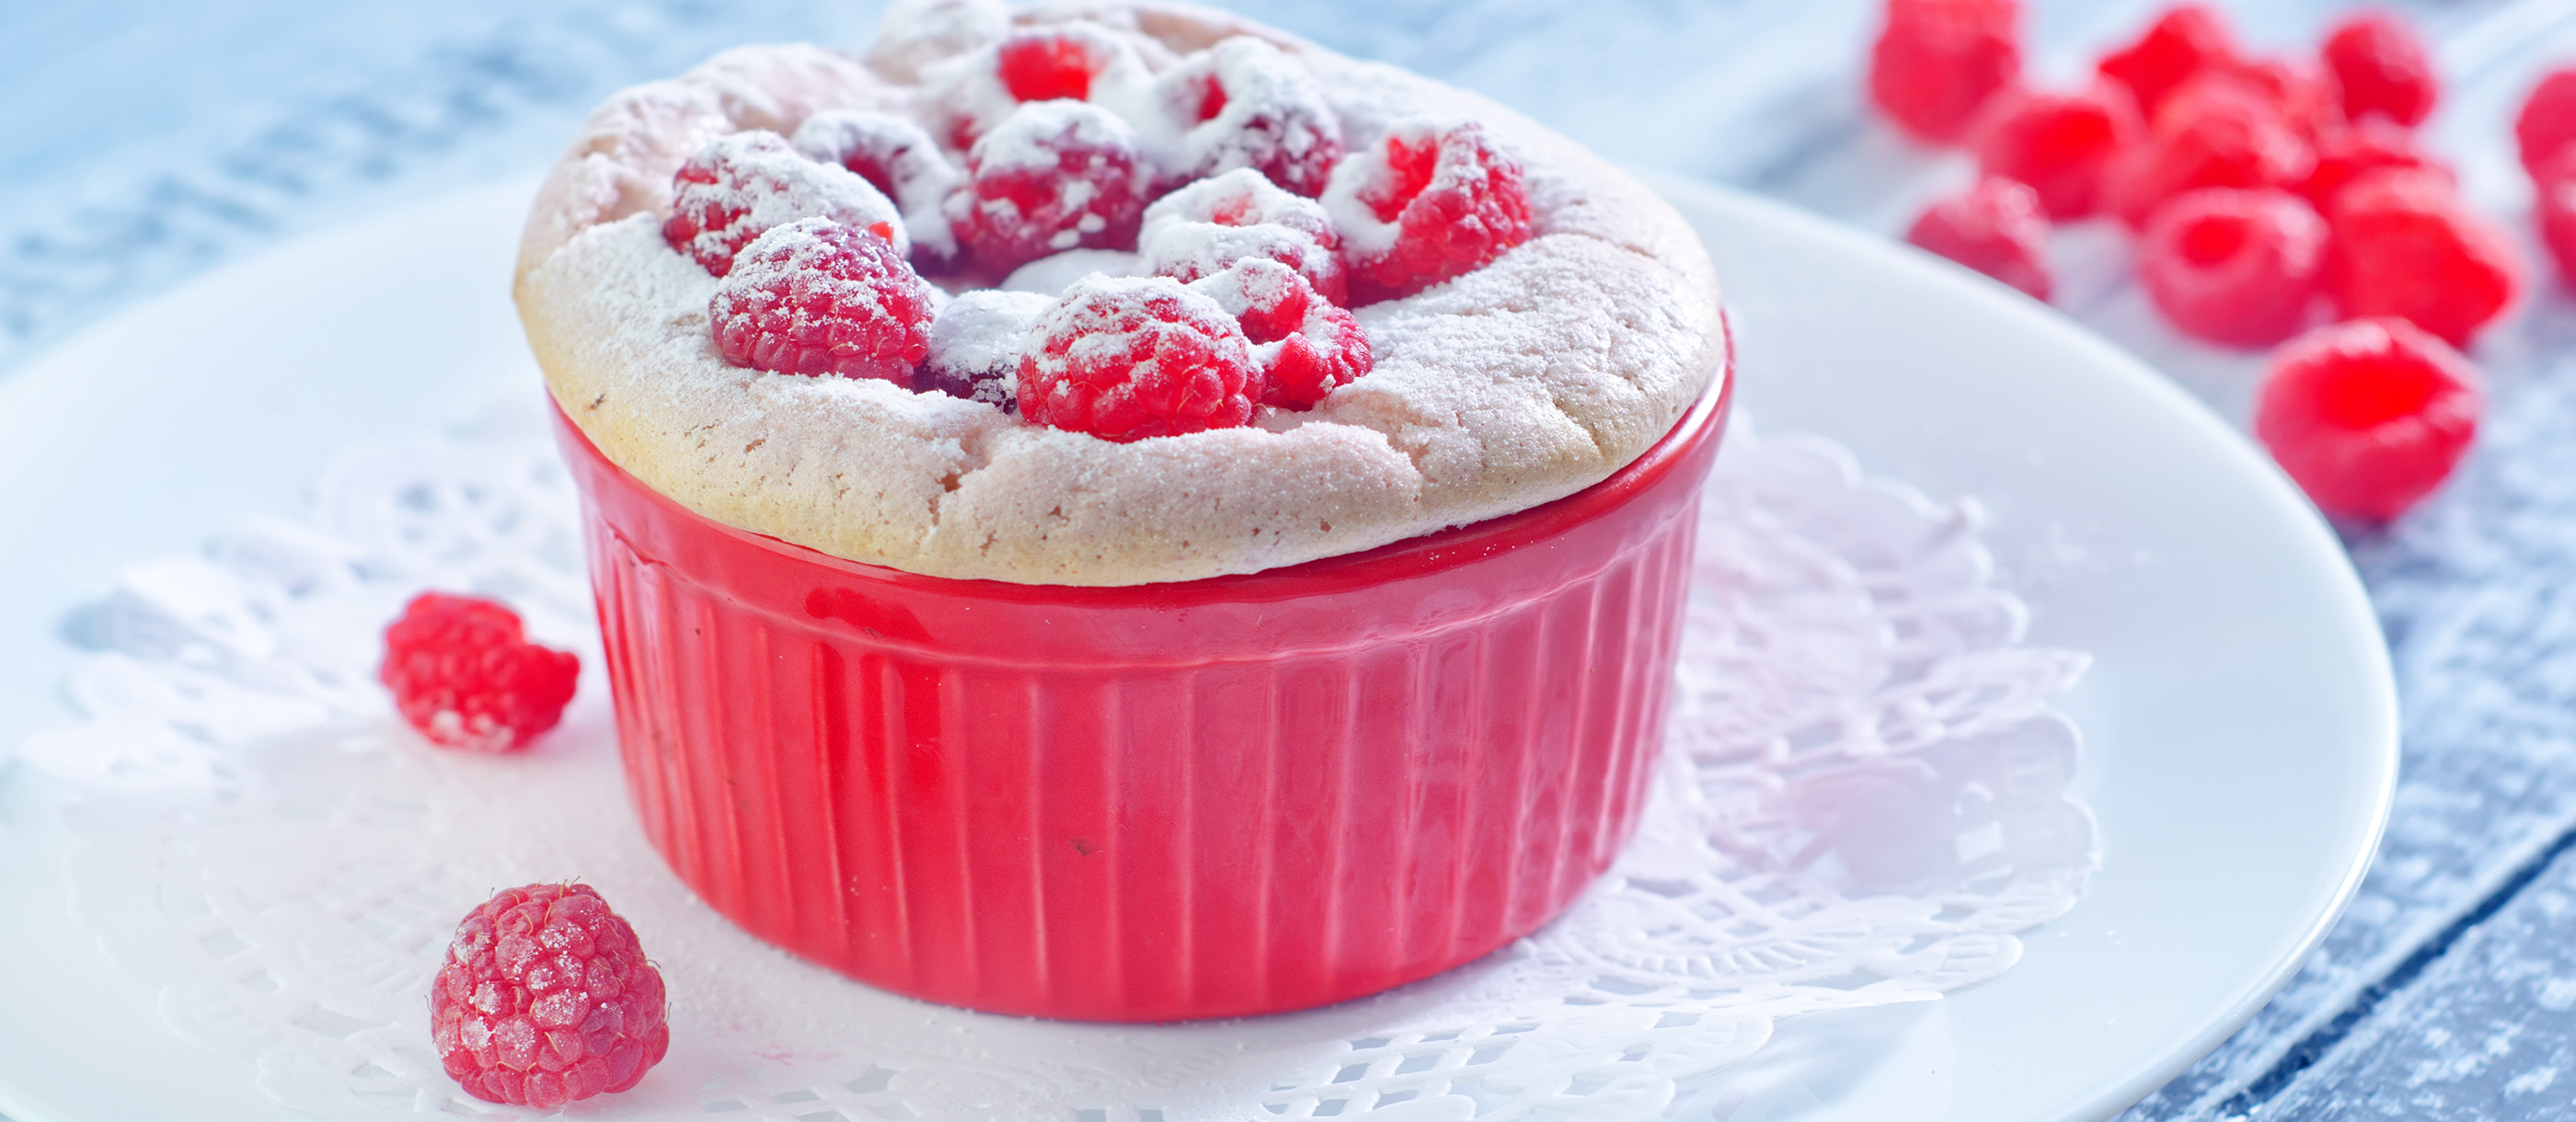 Soufflé Aux Framboises  Traditional Dessert From France, Western